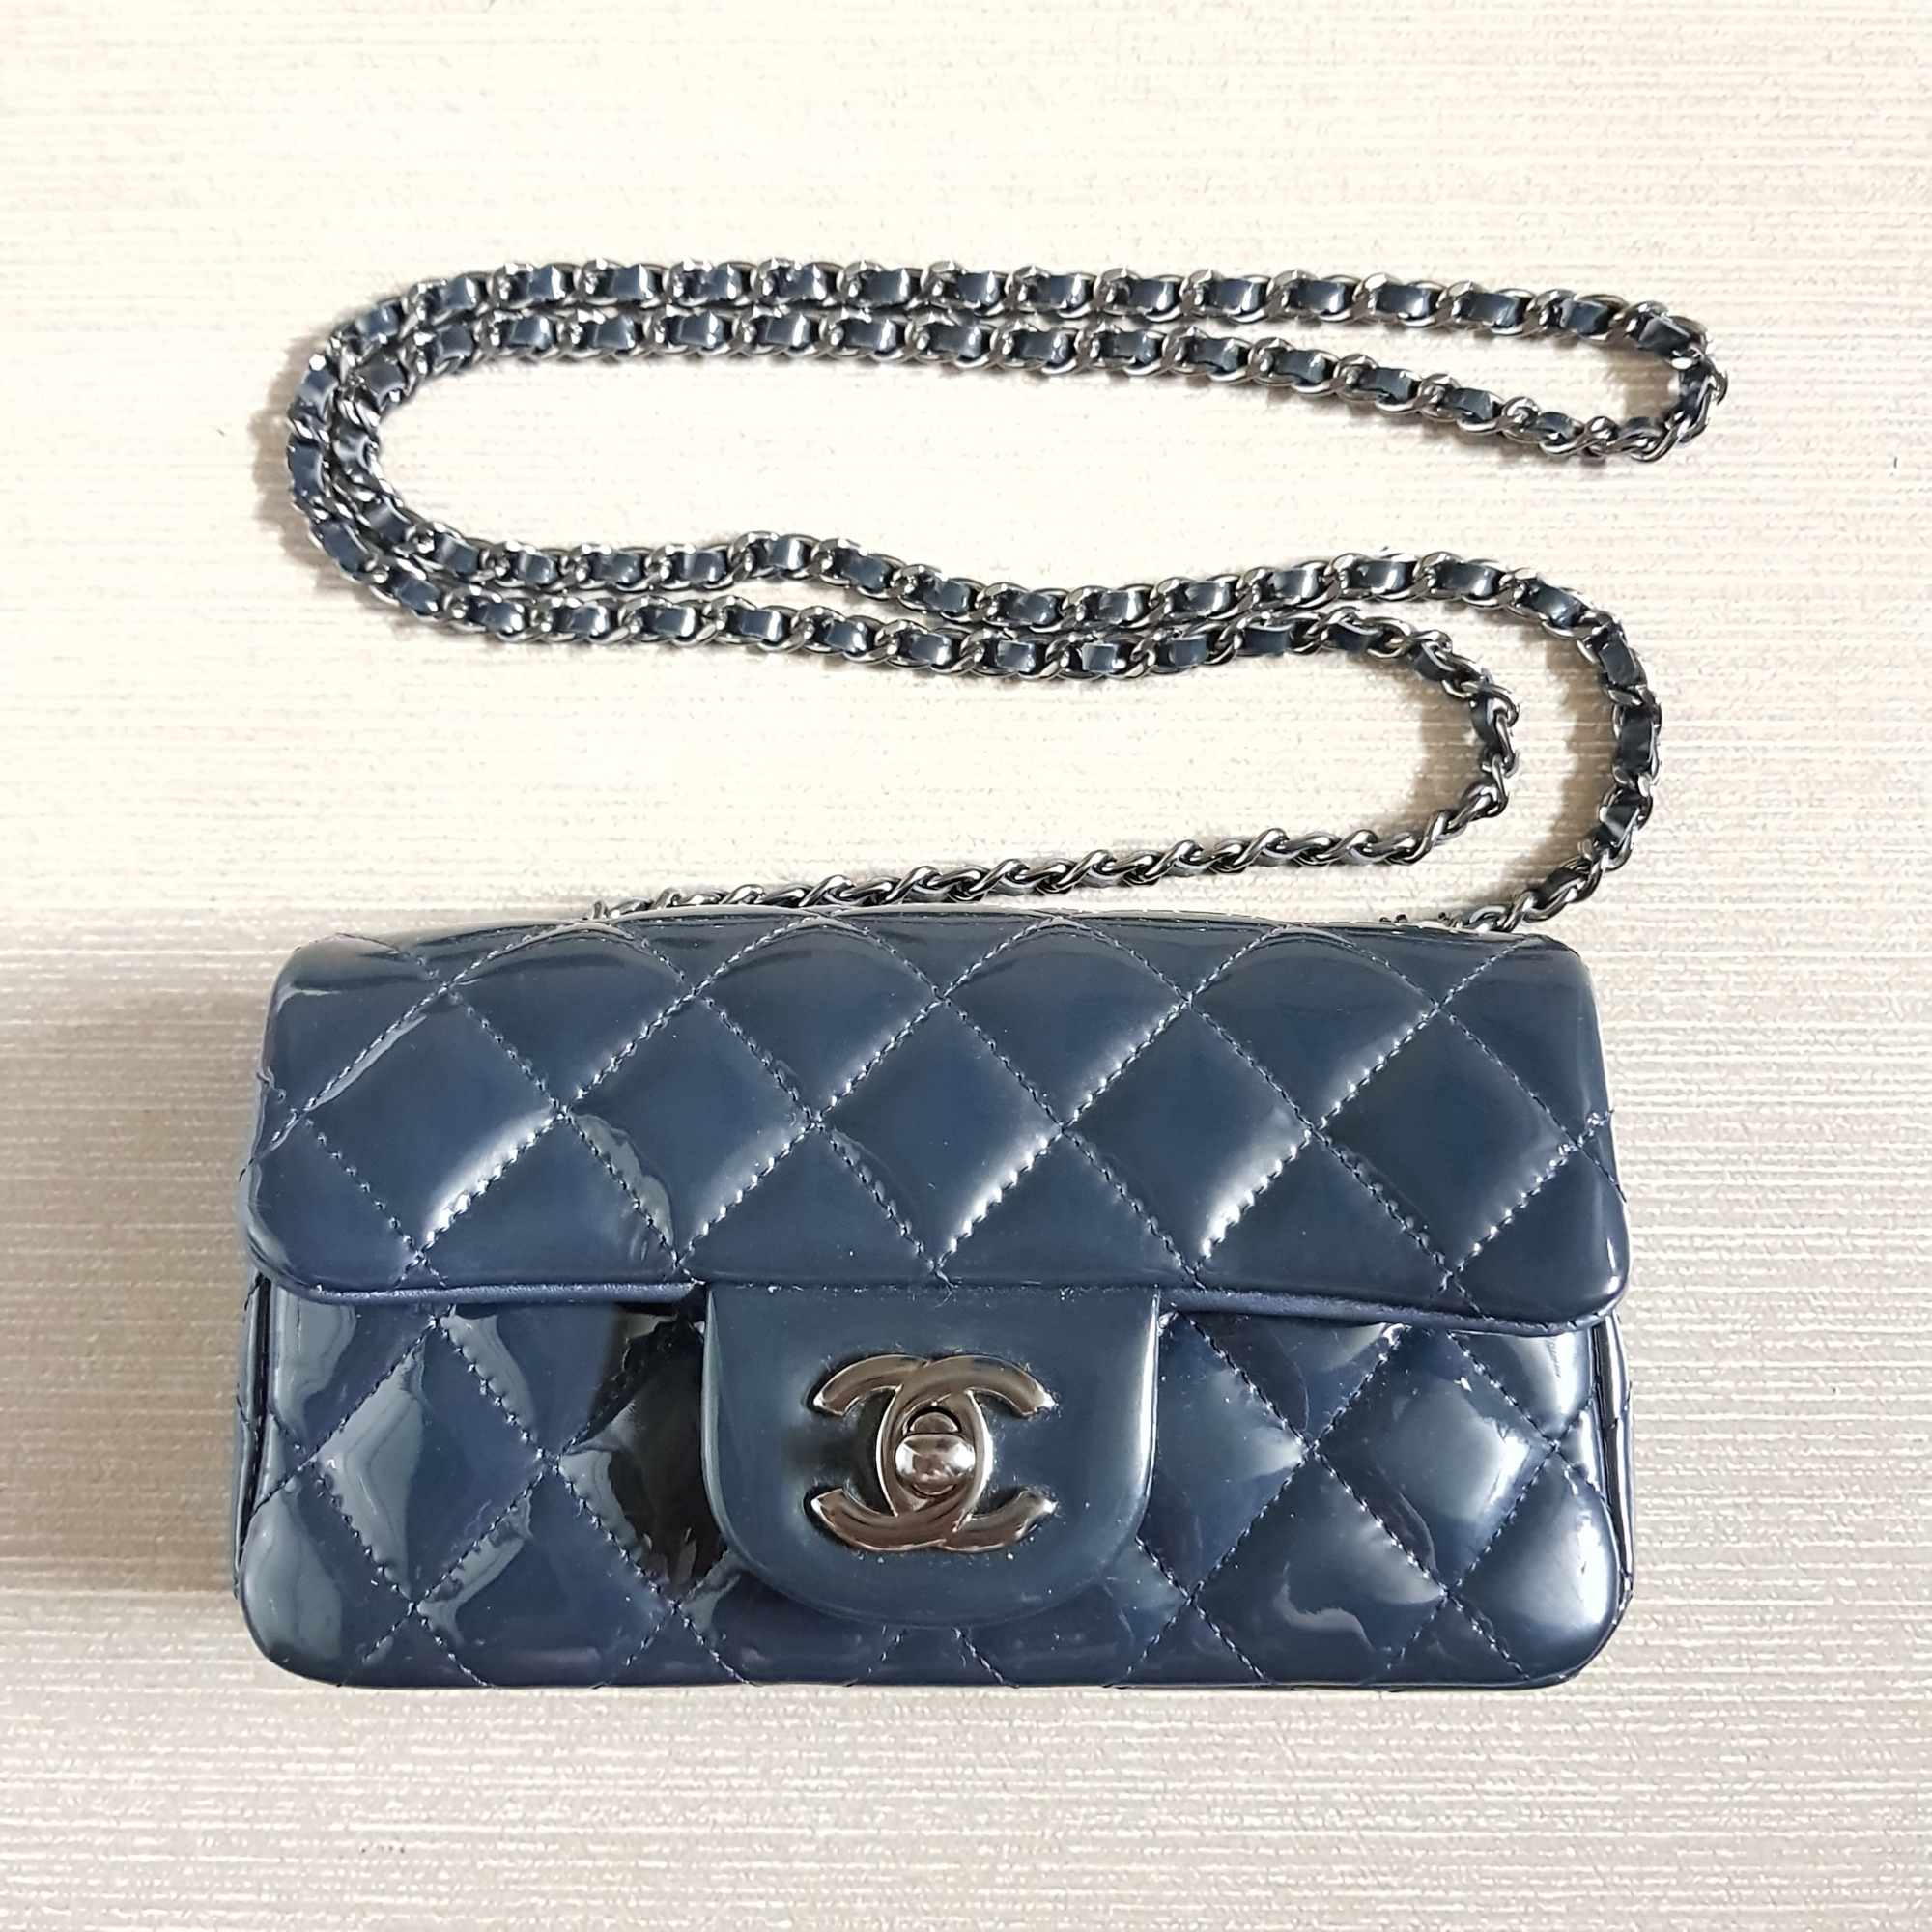 Sell your Designer Bags with eBay Authenticate! – The Bag Hag Diaries